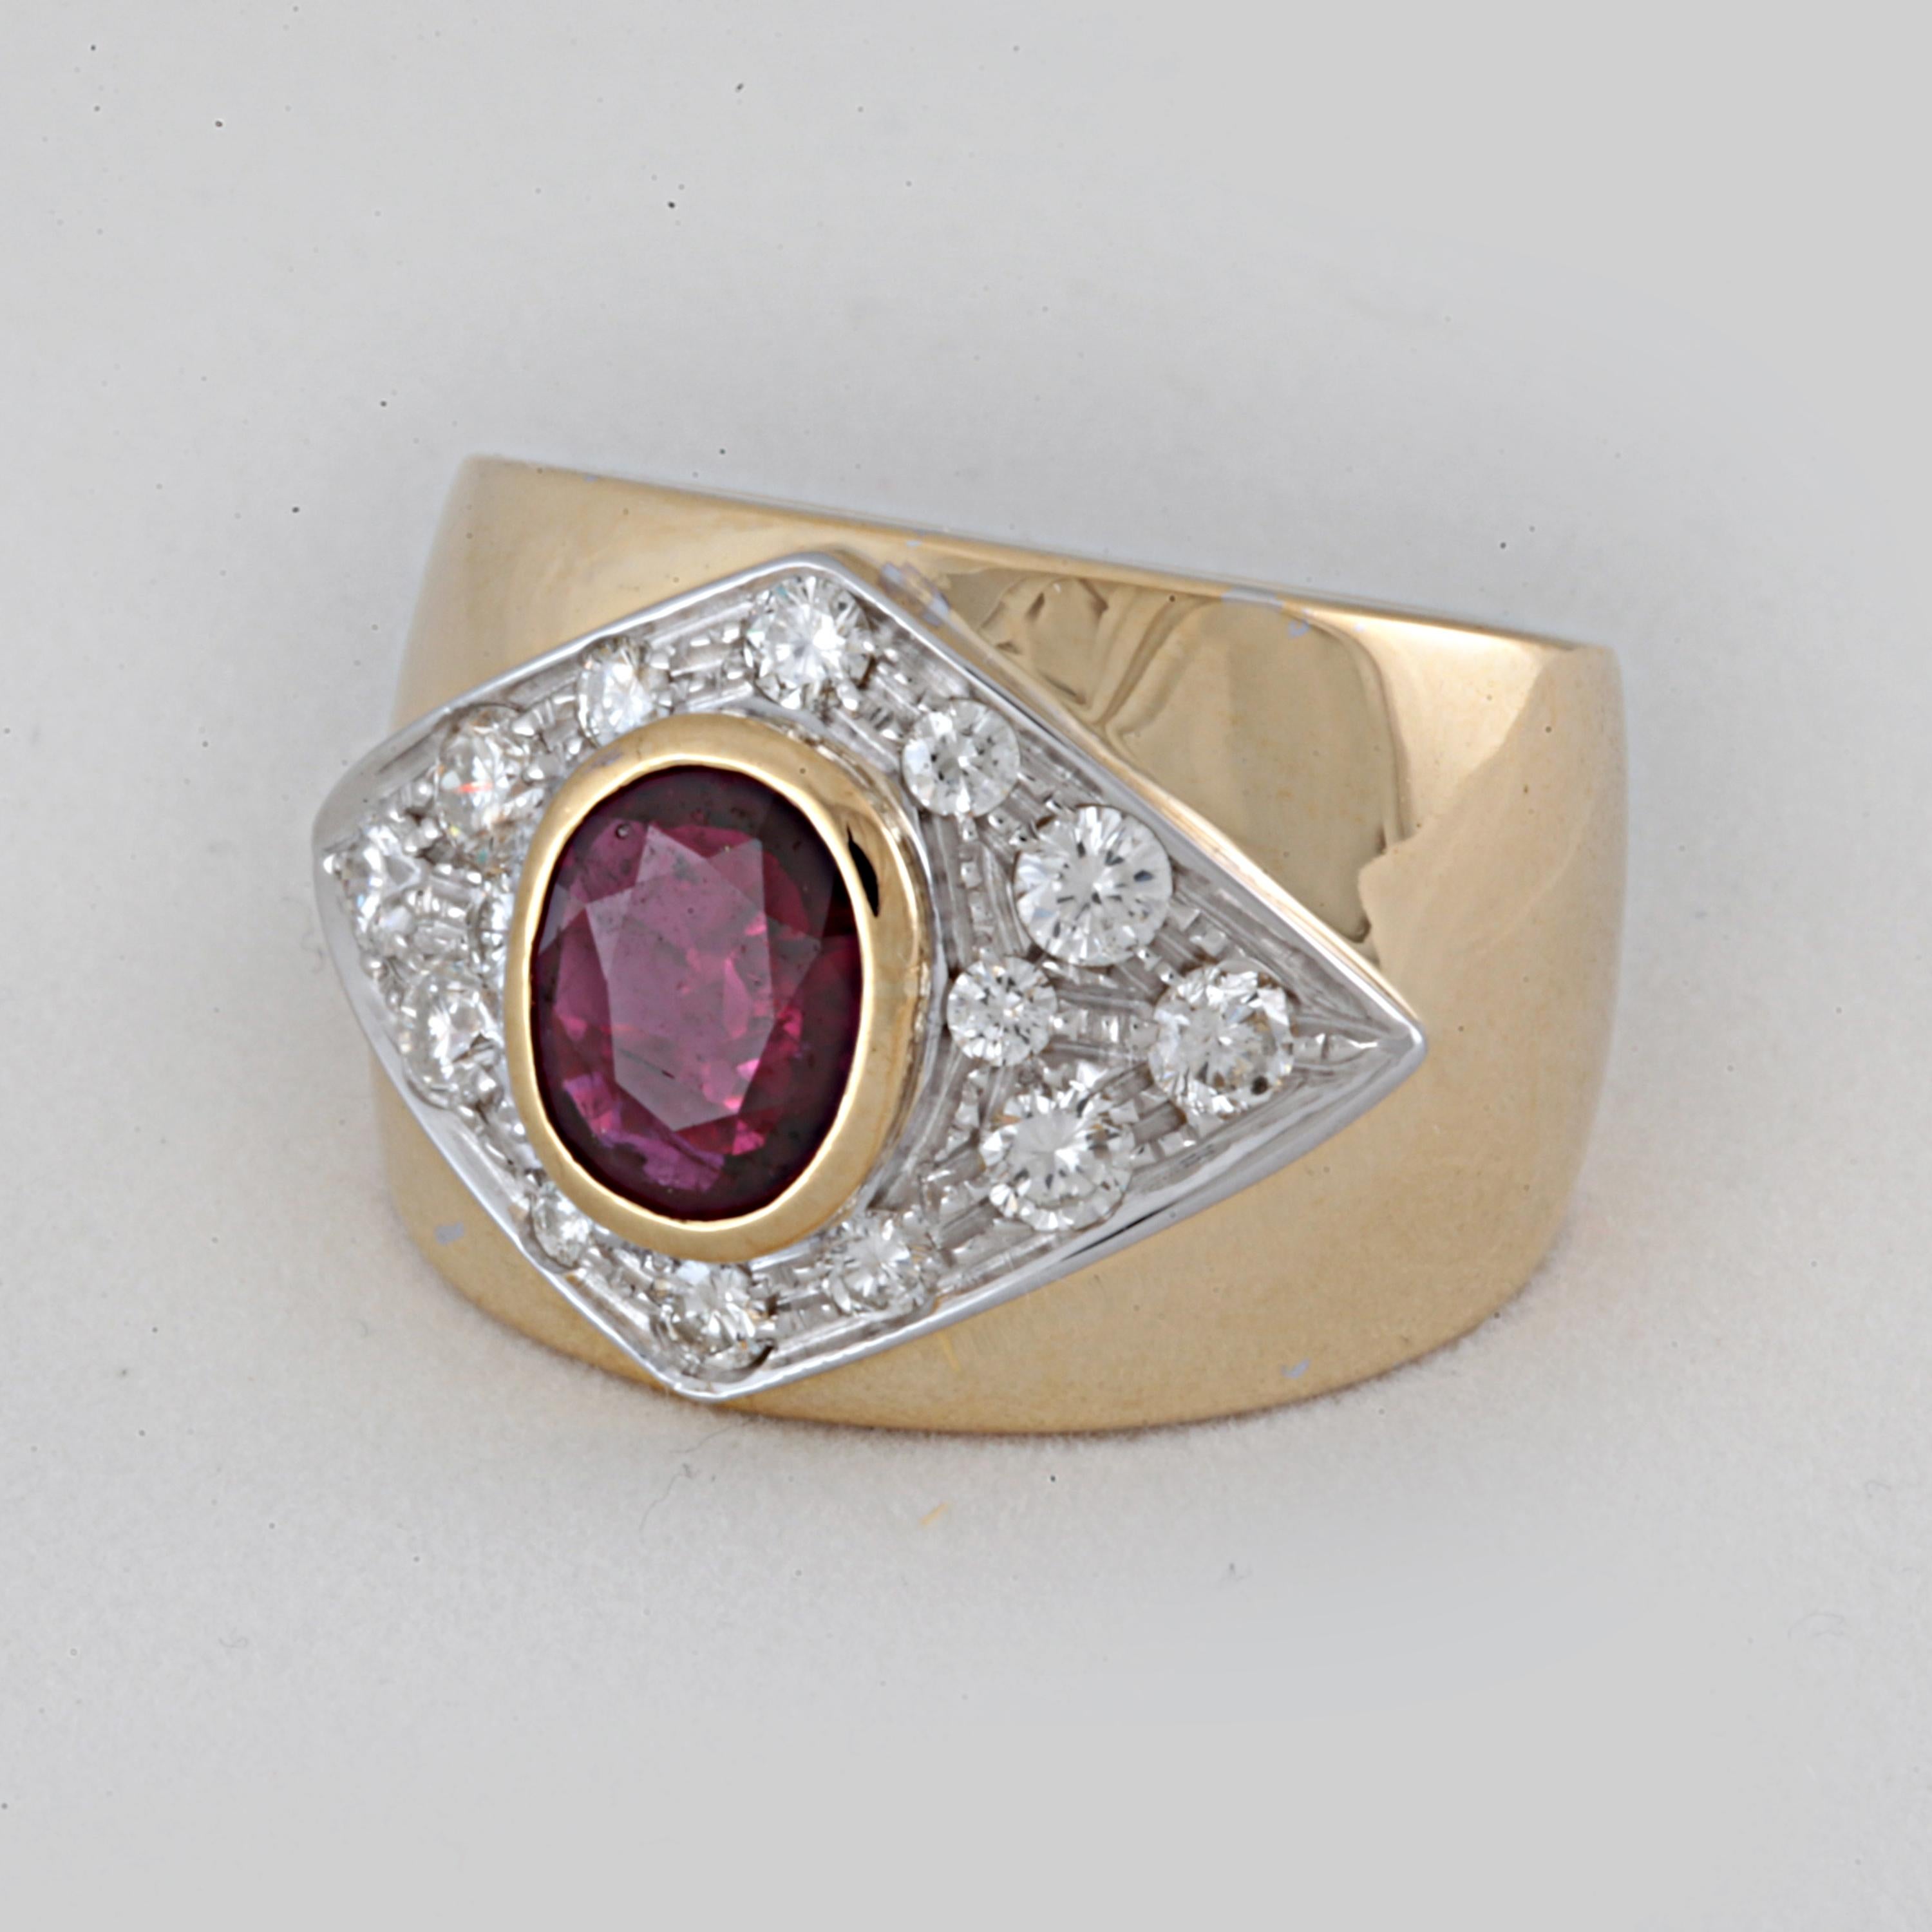 Get your engagement ring from romantic Italy and start the most wonderful journey!
An 18 Kt Yellow and White Gold Band Ring with:
- a 7x9 mm  Oval Faceted Natural Ruby of estimated weight of over 2.00 cts, Purplish Red and Transparent. The Ruby